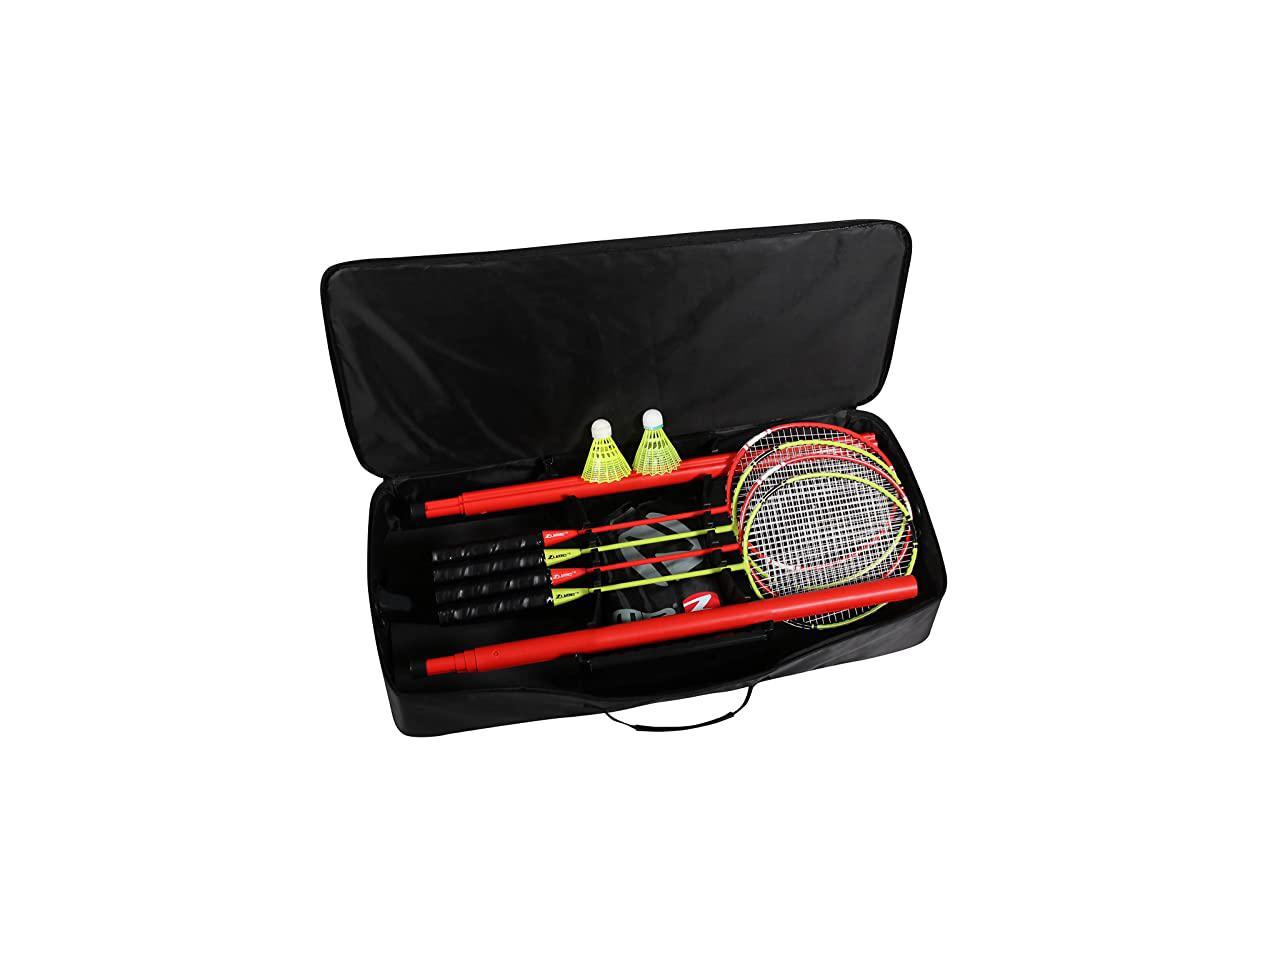 Games Portable Badminton Set with Freestanding Base Sets Up on Any ...